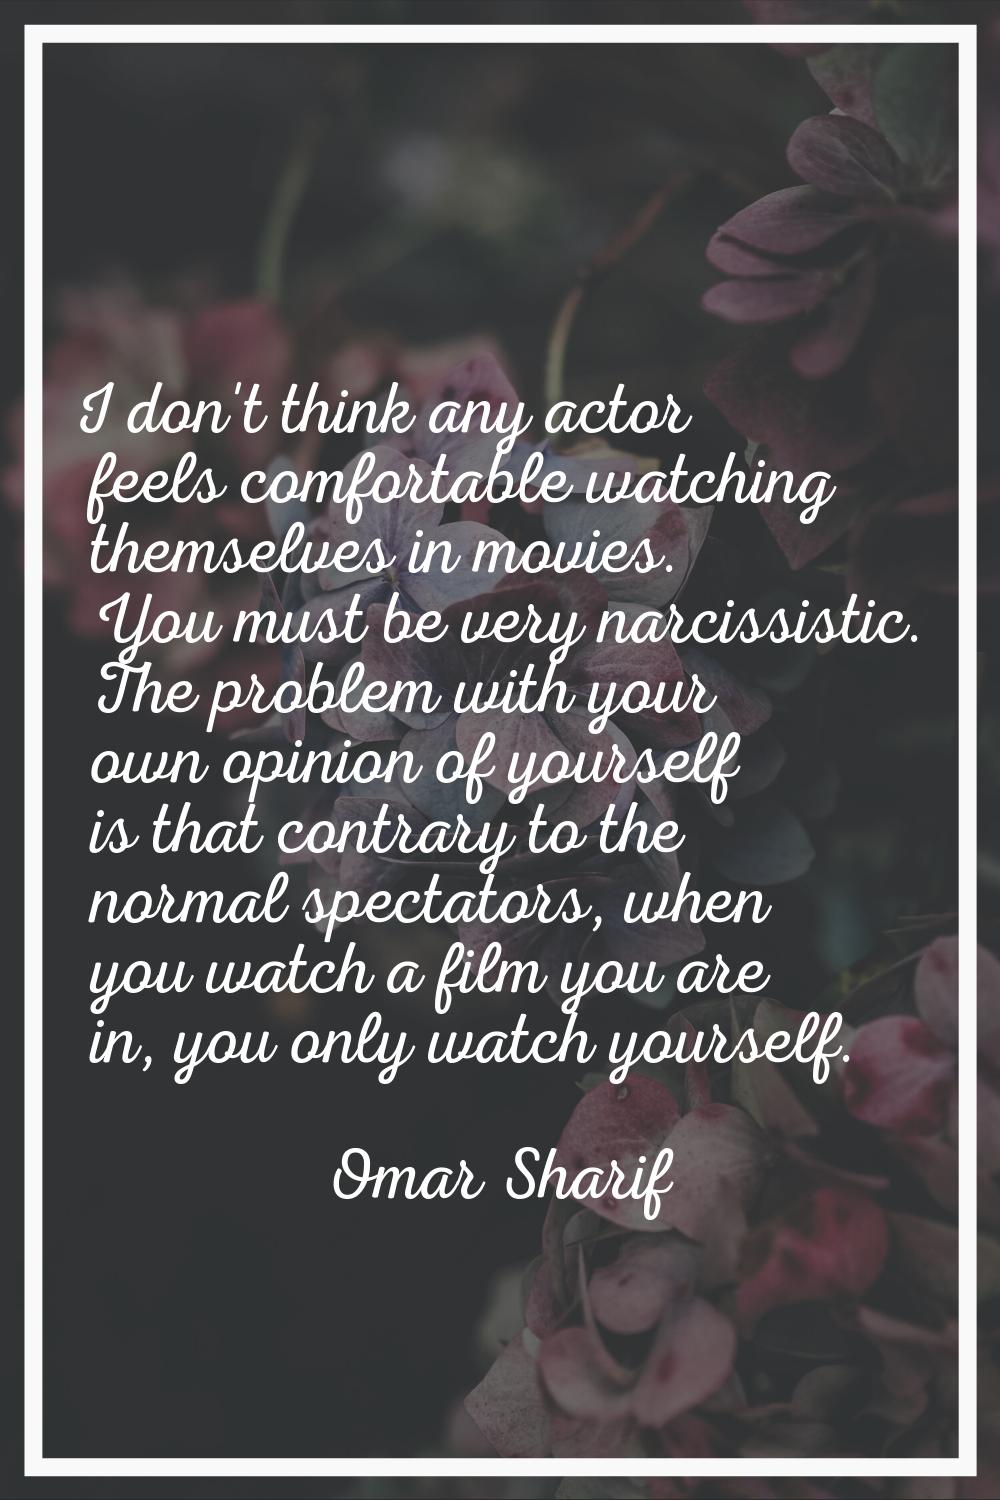 I don't think any actor feels comfortable watching themselves in movies. You must be very narcissis